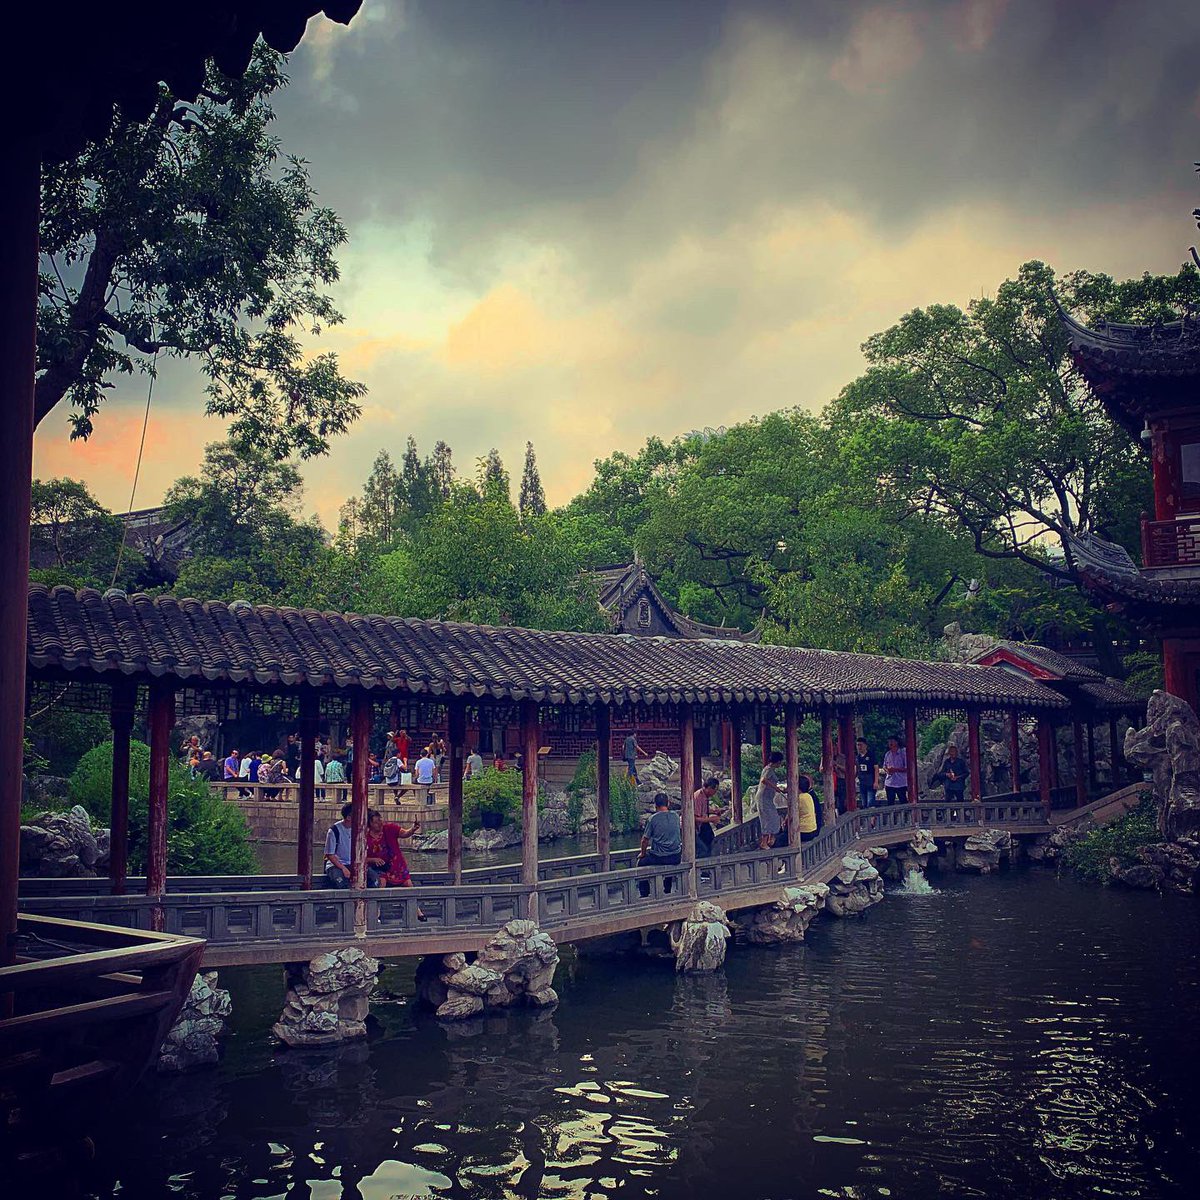 After a long time, I have finally experienced the #Enchantment , #Magic and #Mystery of #YuGarden ⛩

#Shanghai #China #GrayDay #Explore #History #SixHundredYears #Magical #LongTimeOverdue #Fantastic #Garden